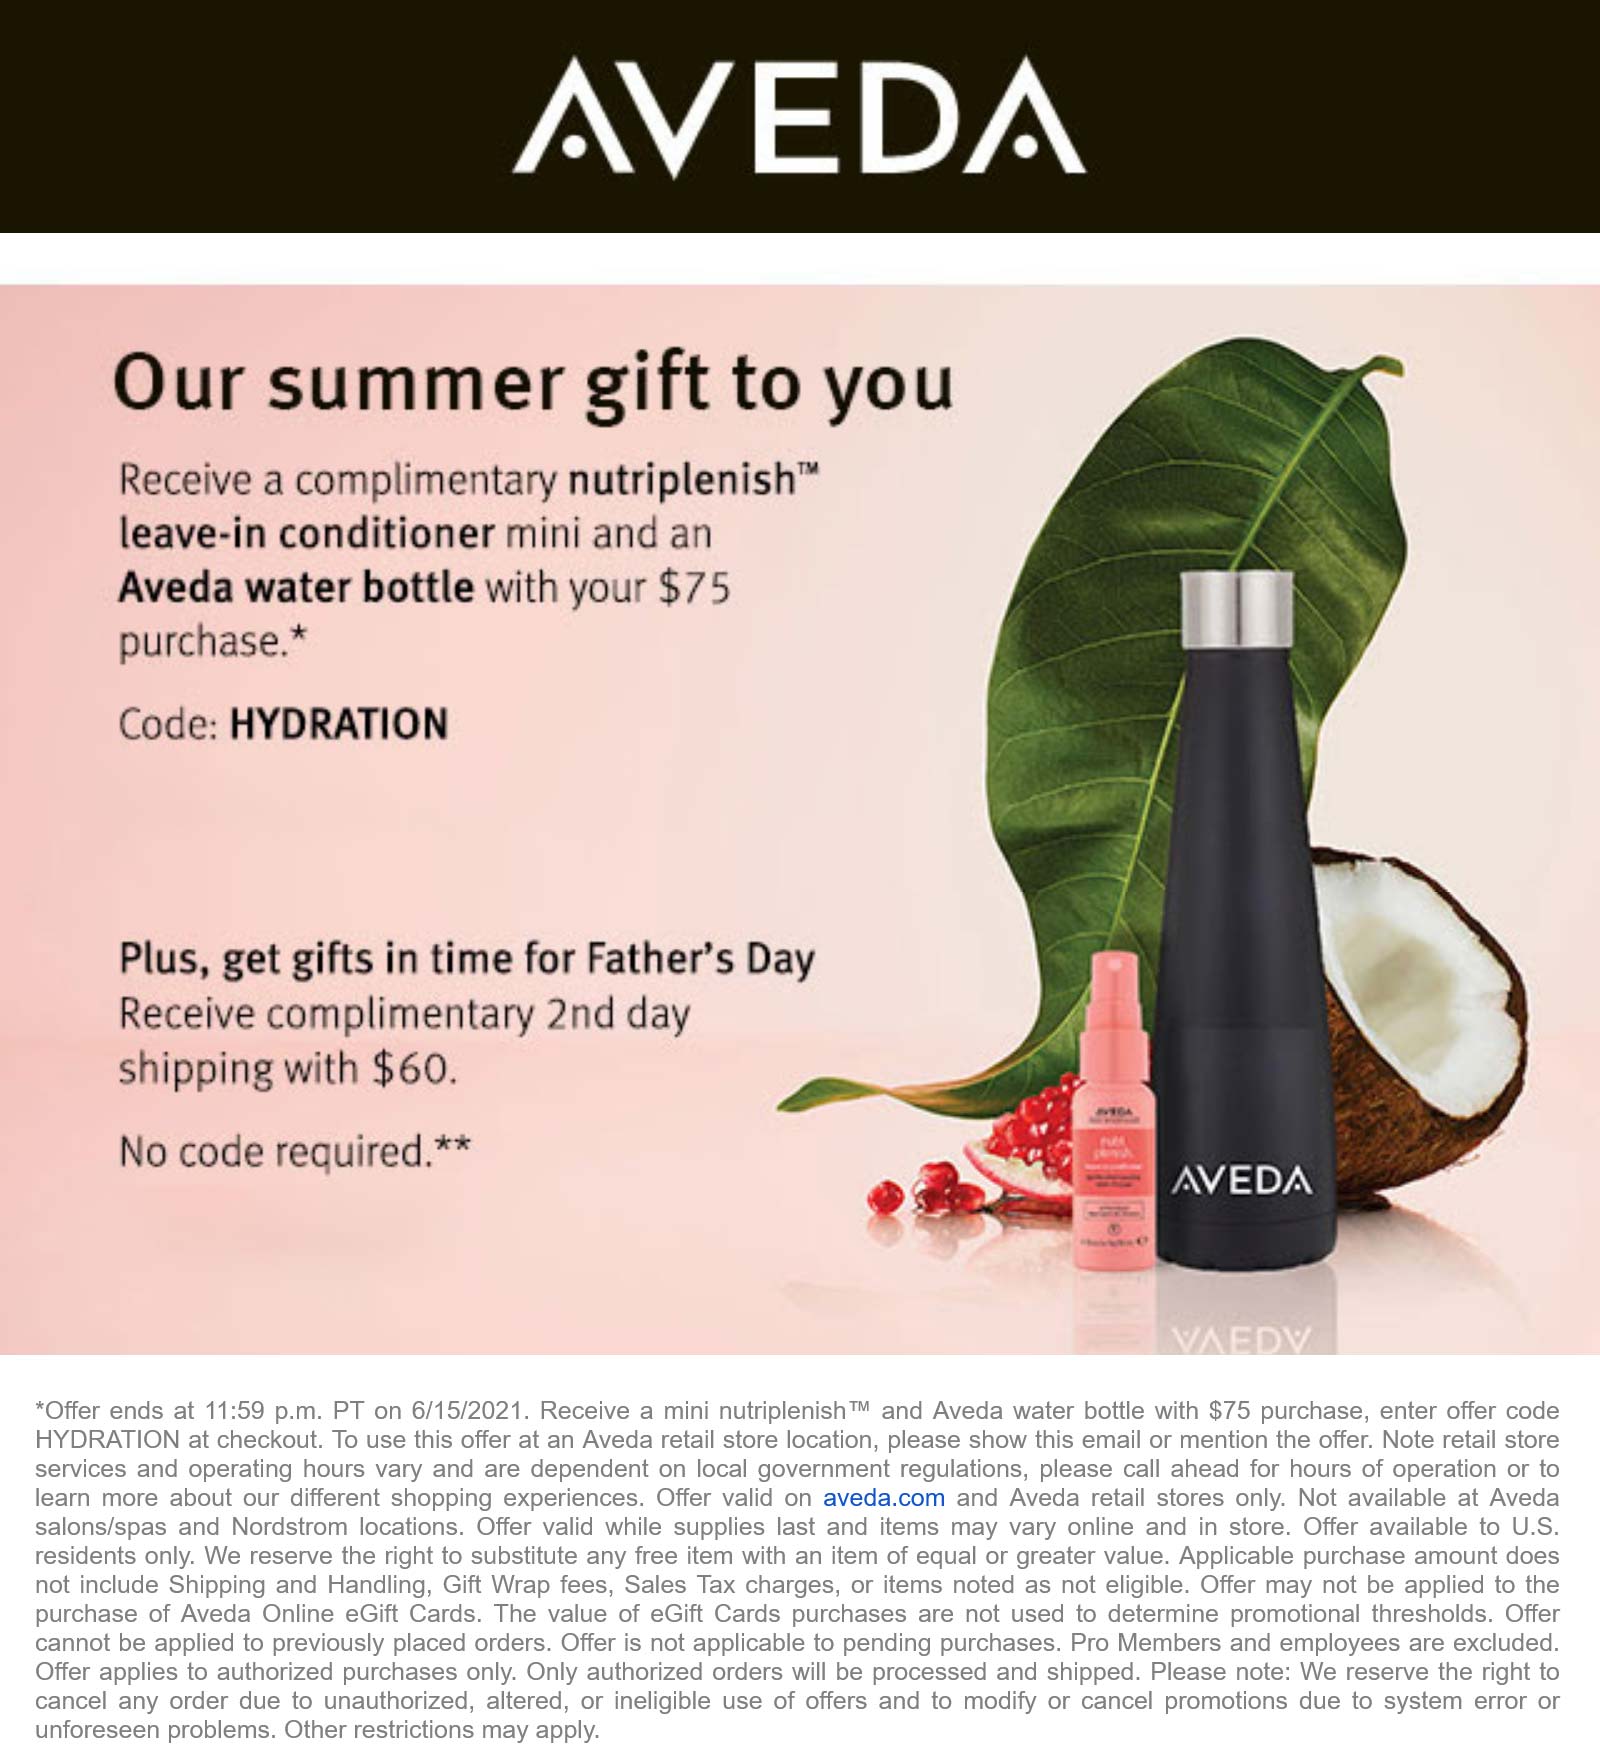 AVEDA stores Coupon  Free water bottle + nutriplenish with $75 spent at AVEDA via promo code HYDRATION #aveda 